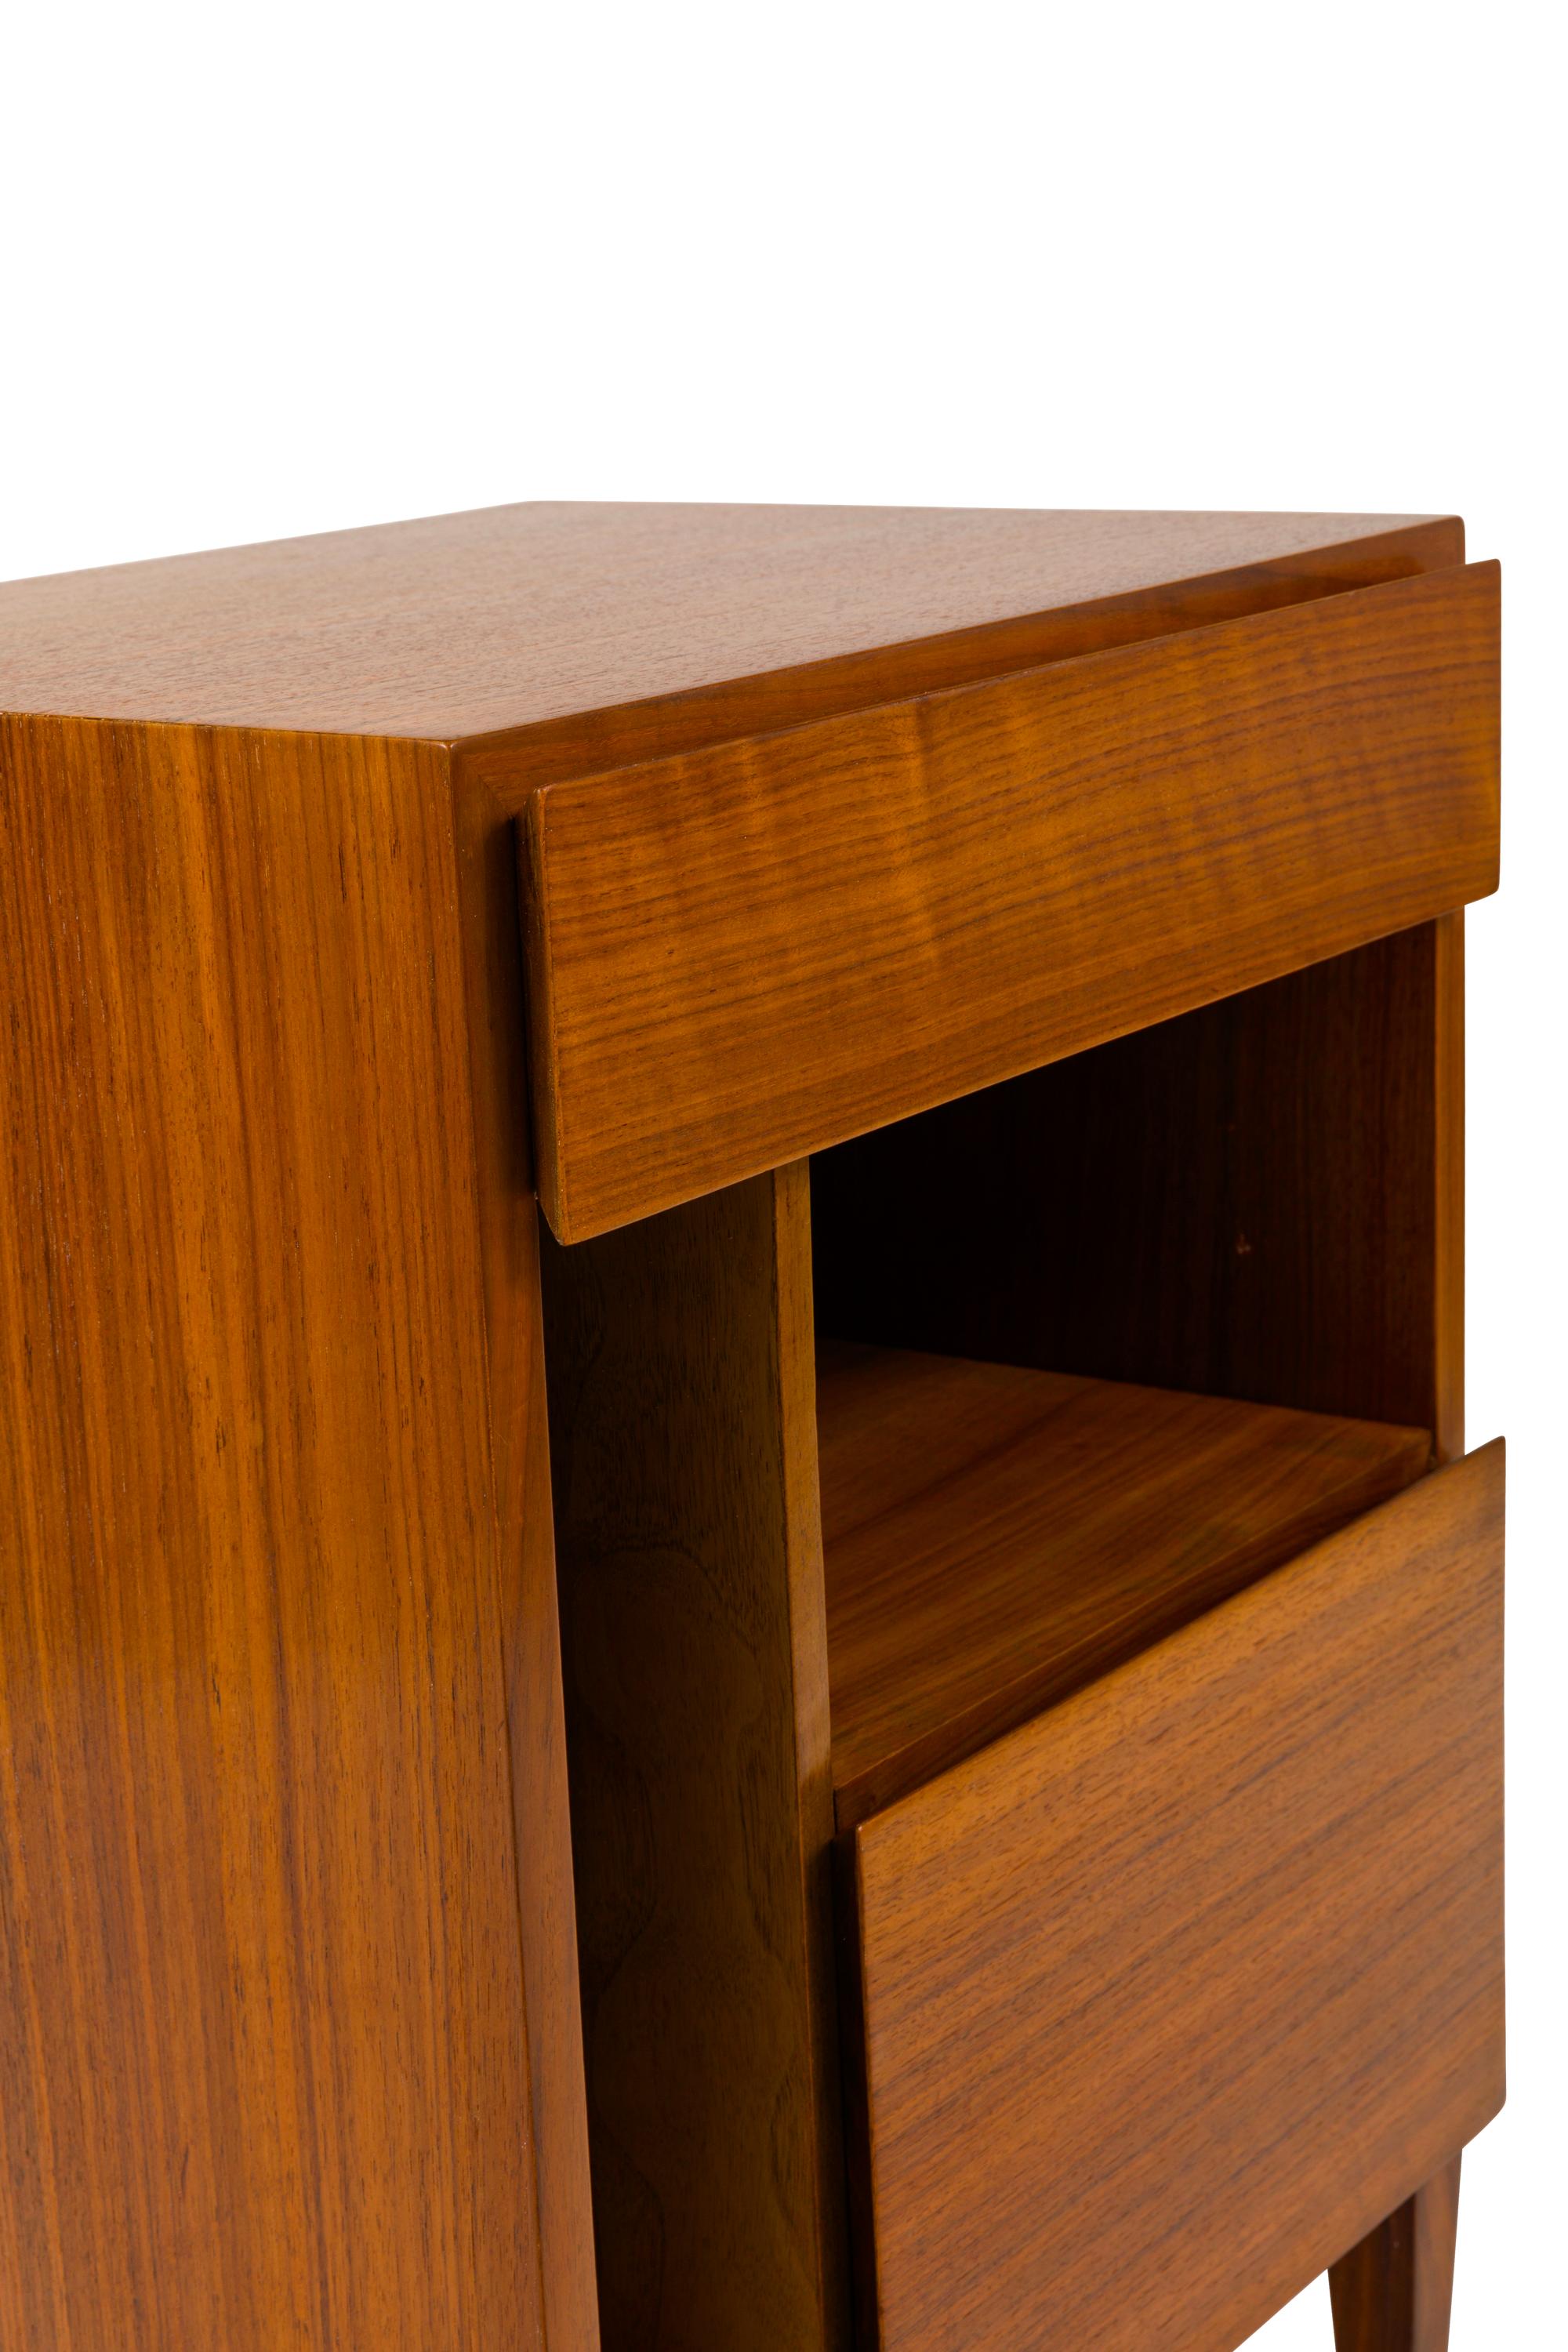 Walnut Gio Ponti Nightstands for Singer & Sons, Italy, 1955